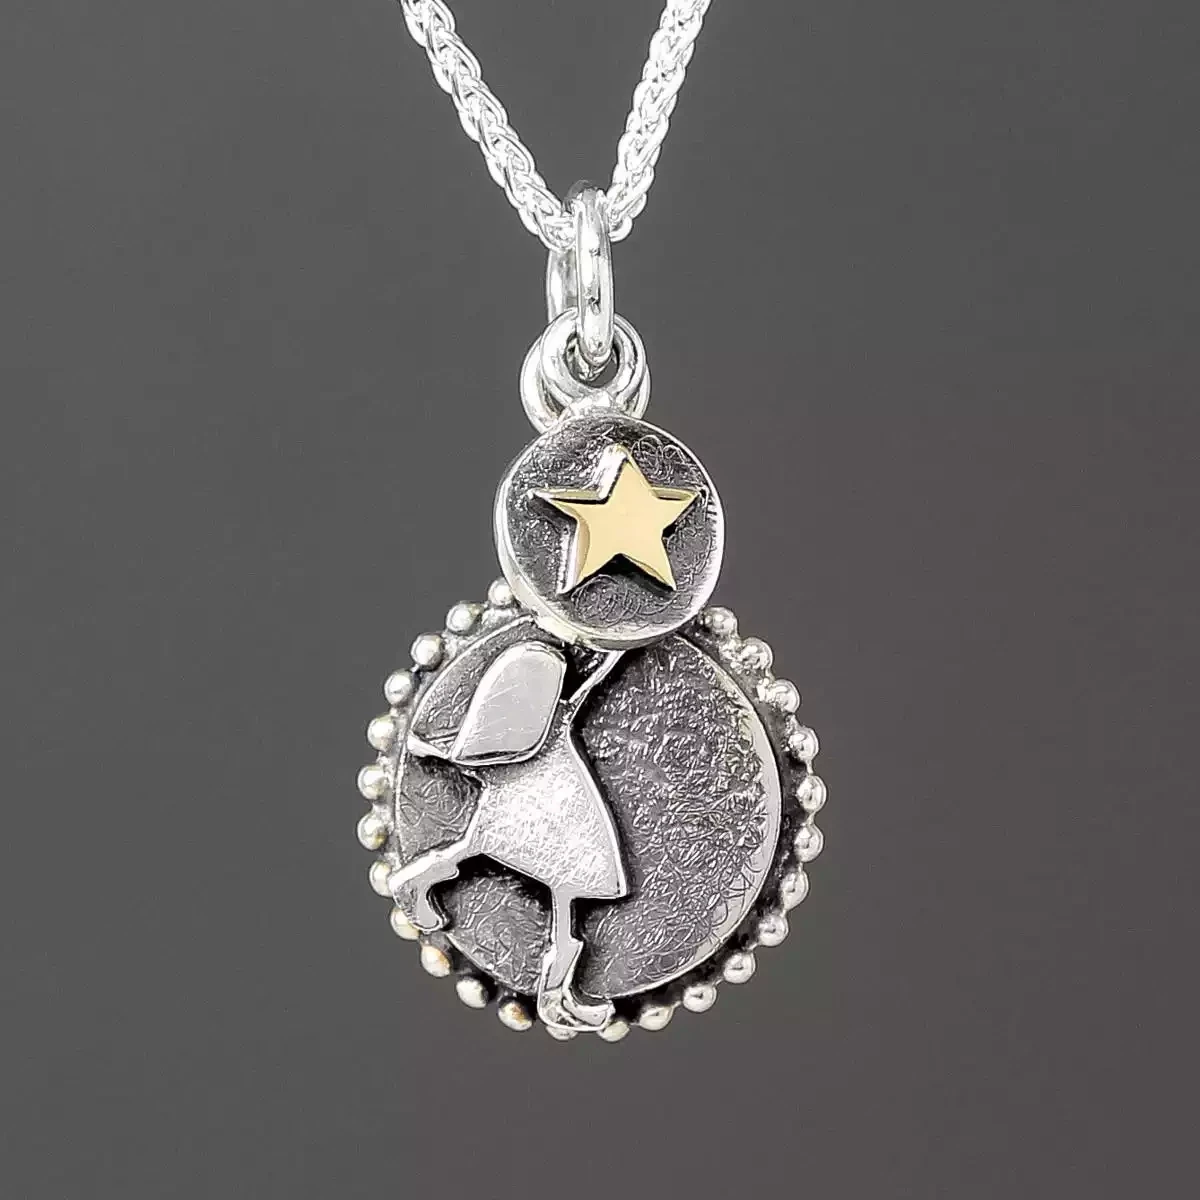 Reach for the Stars Silver and Gold Charm Pendant by Linda Macdonald